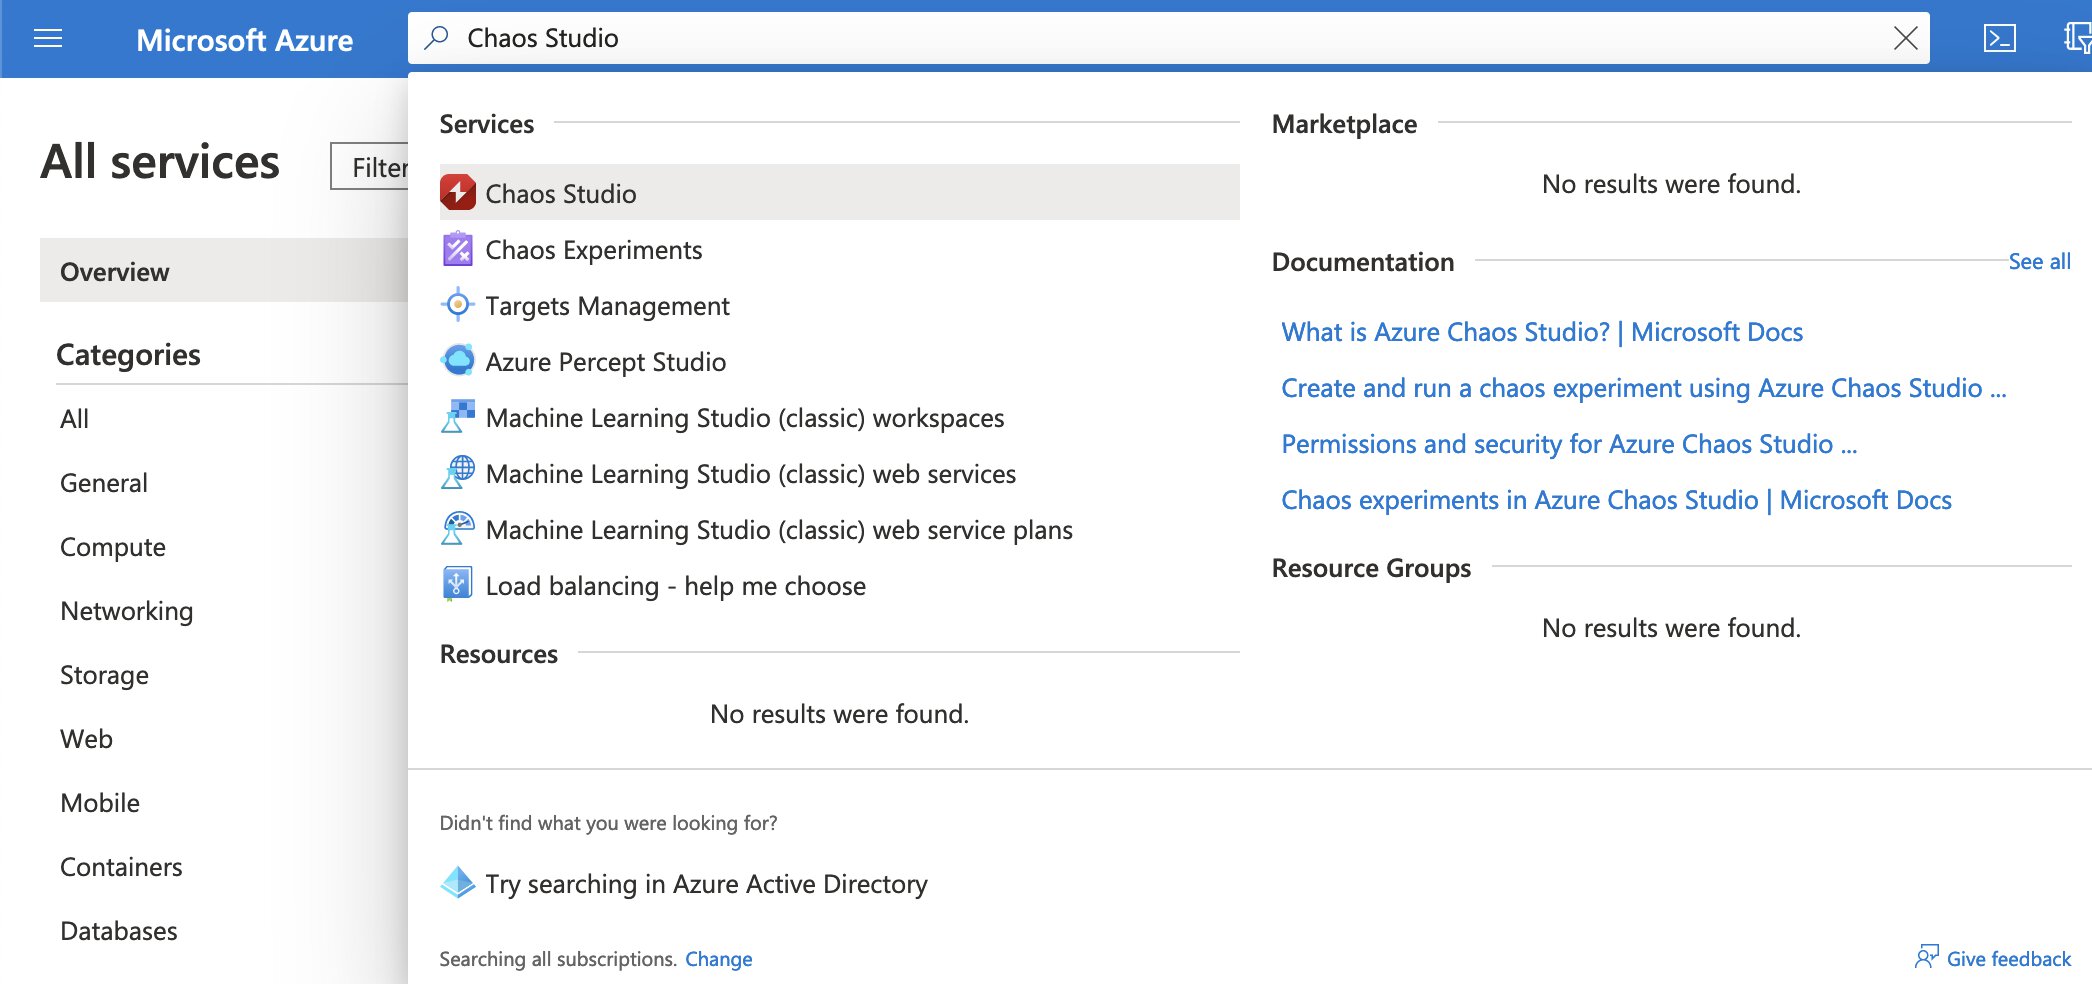 Image of the Azure Portal, we are entering the search terms “Chaos Studio” in the search bar on top of the portal interface.